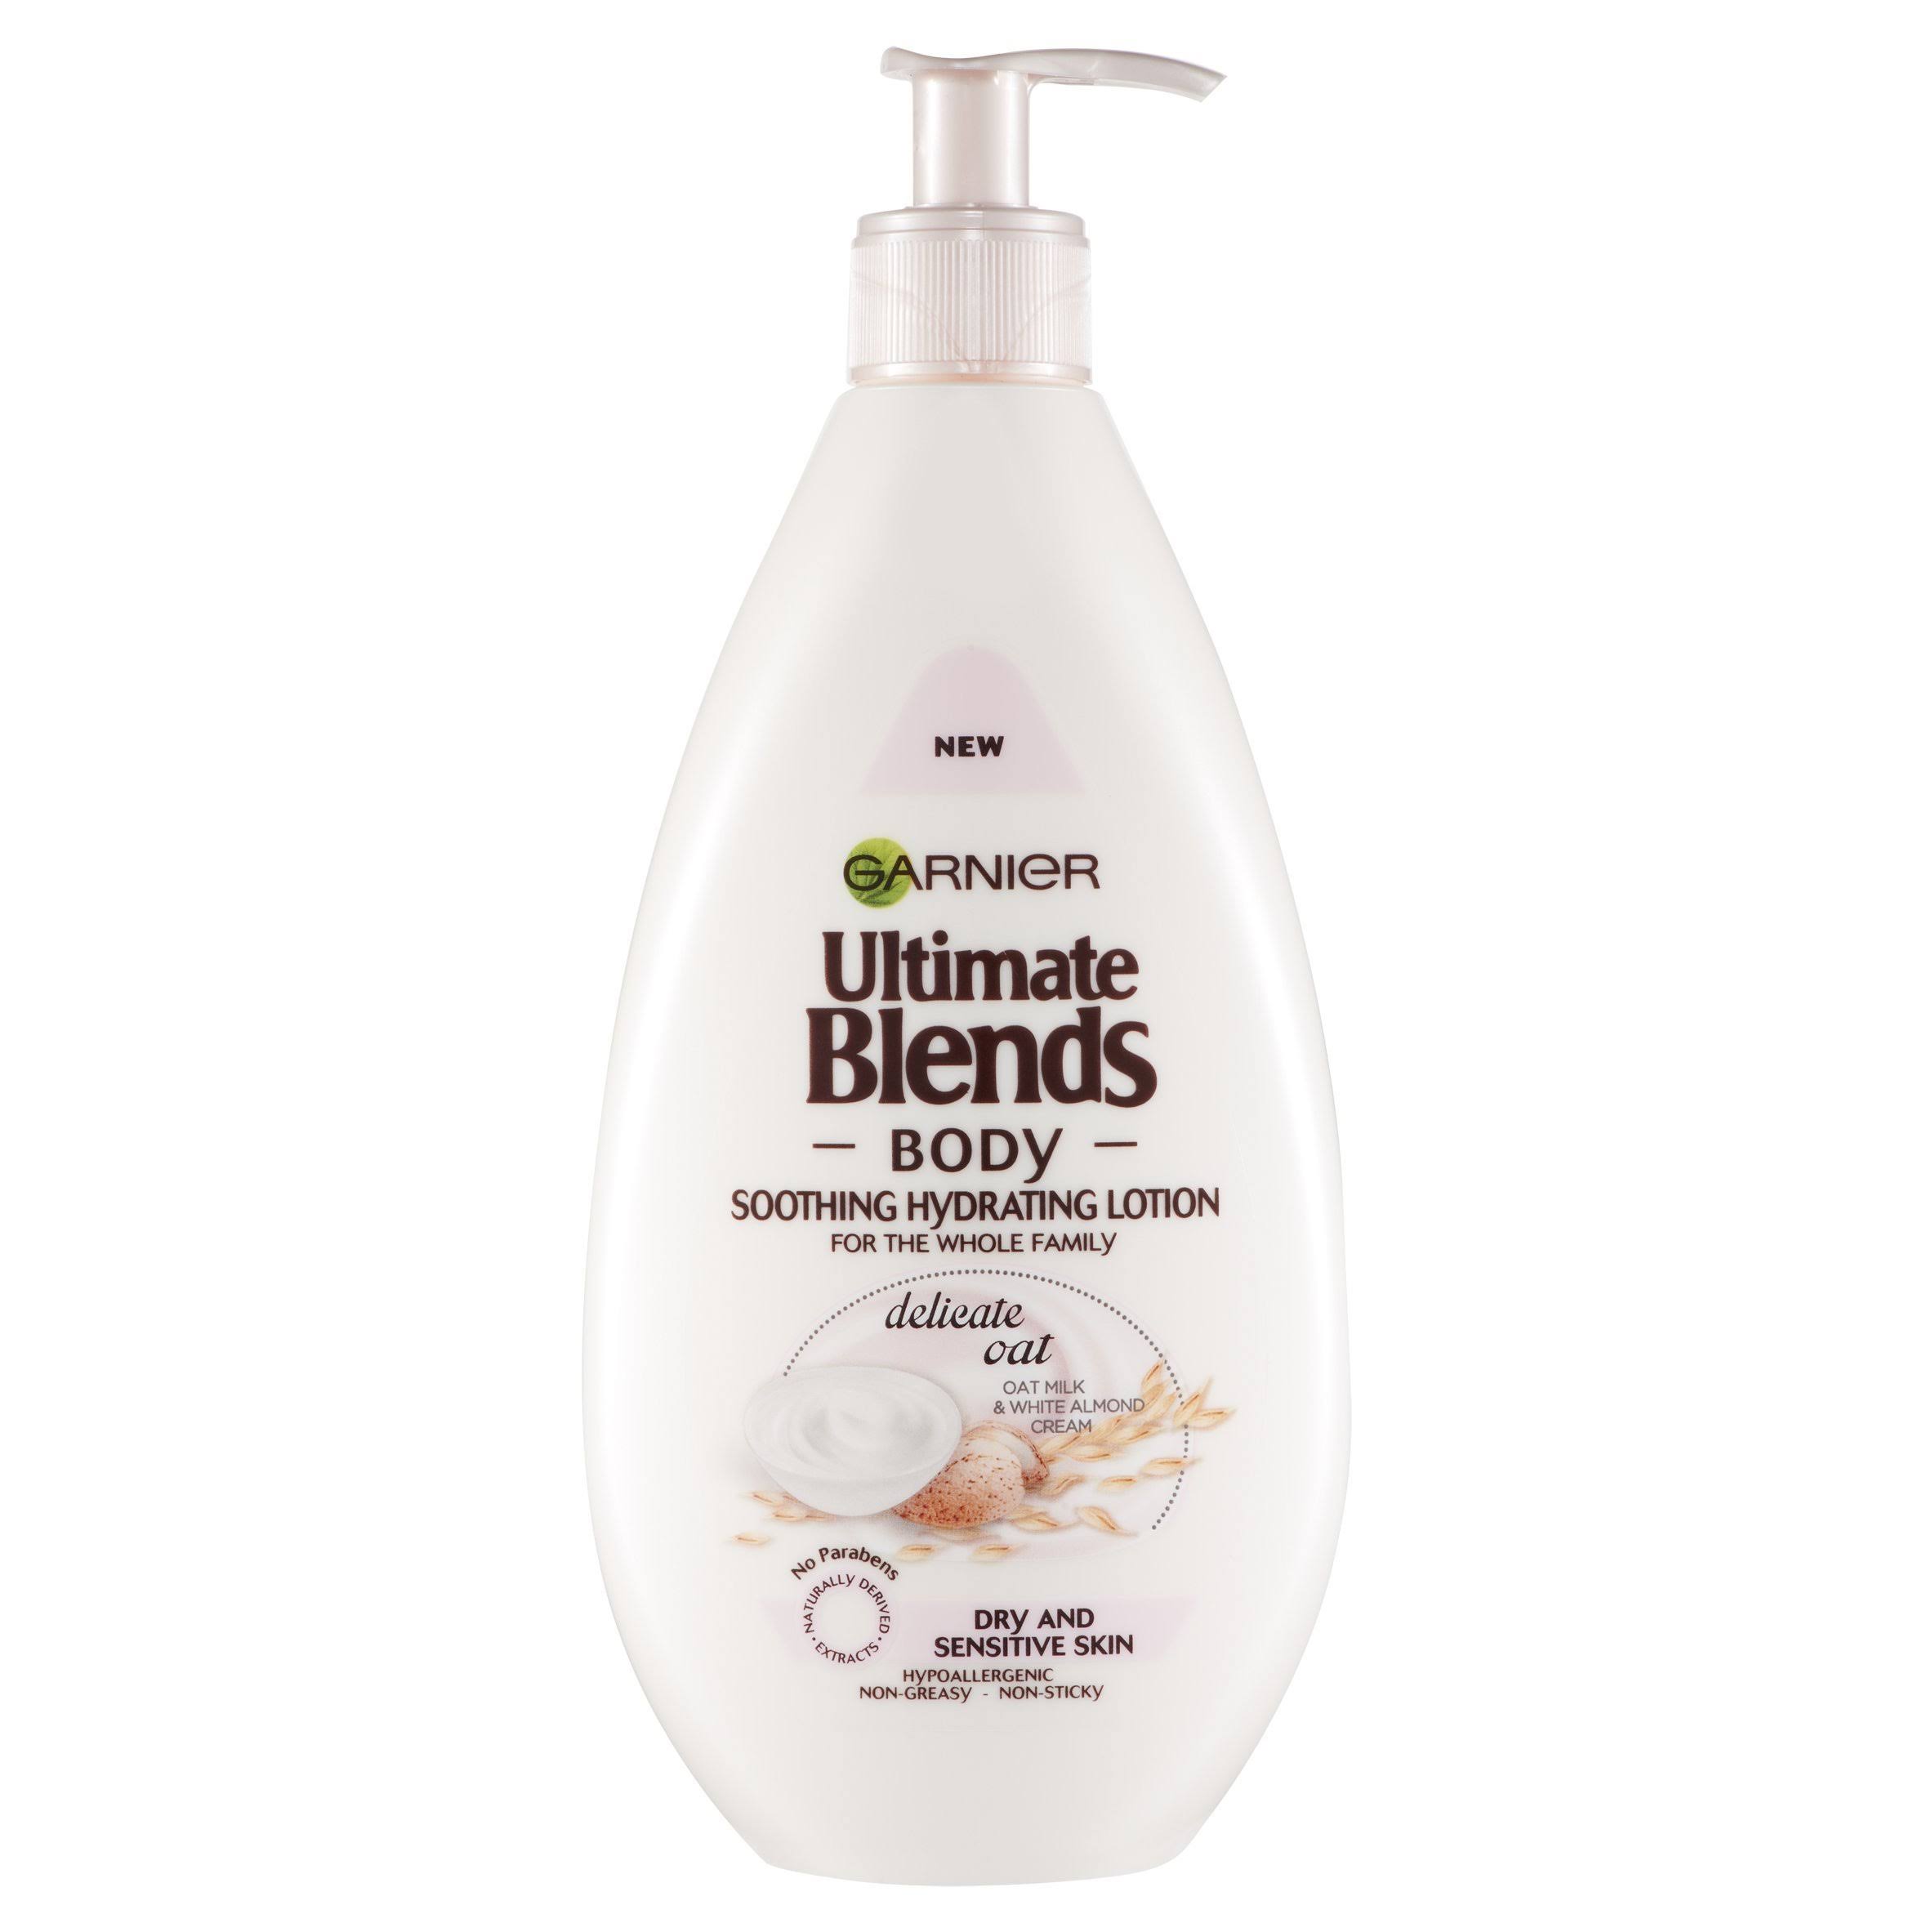 Garnier Ultimate Blends BodySoothing Hydrating Lotion - Delicate Oat, 400ml